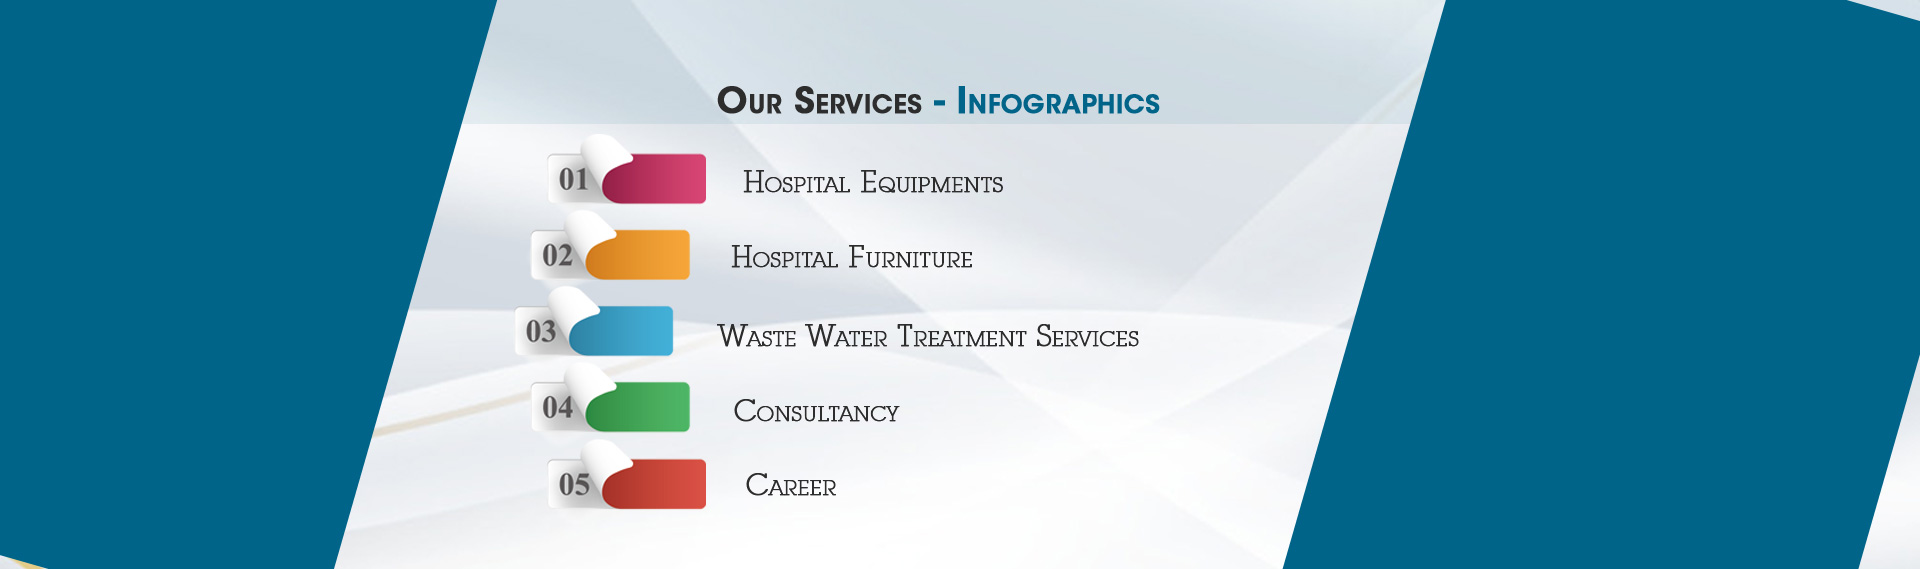 Our Services - Infographics